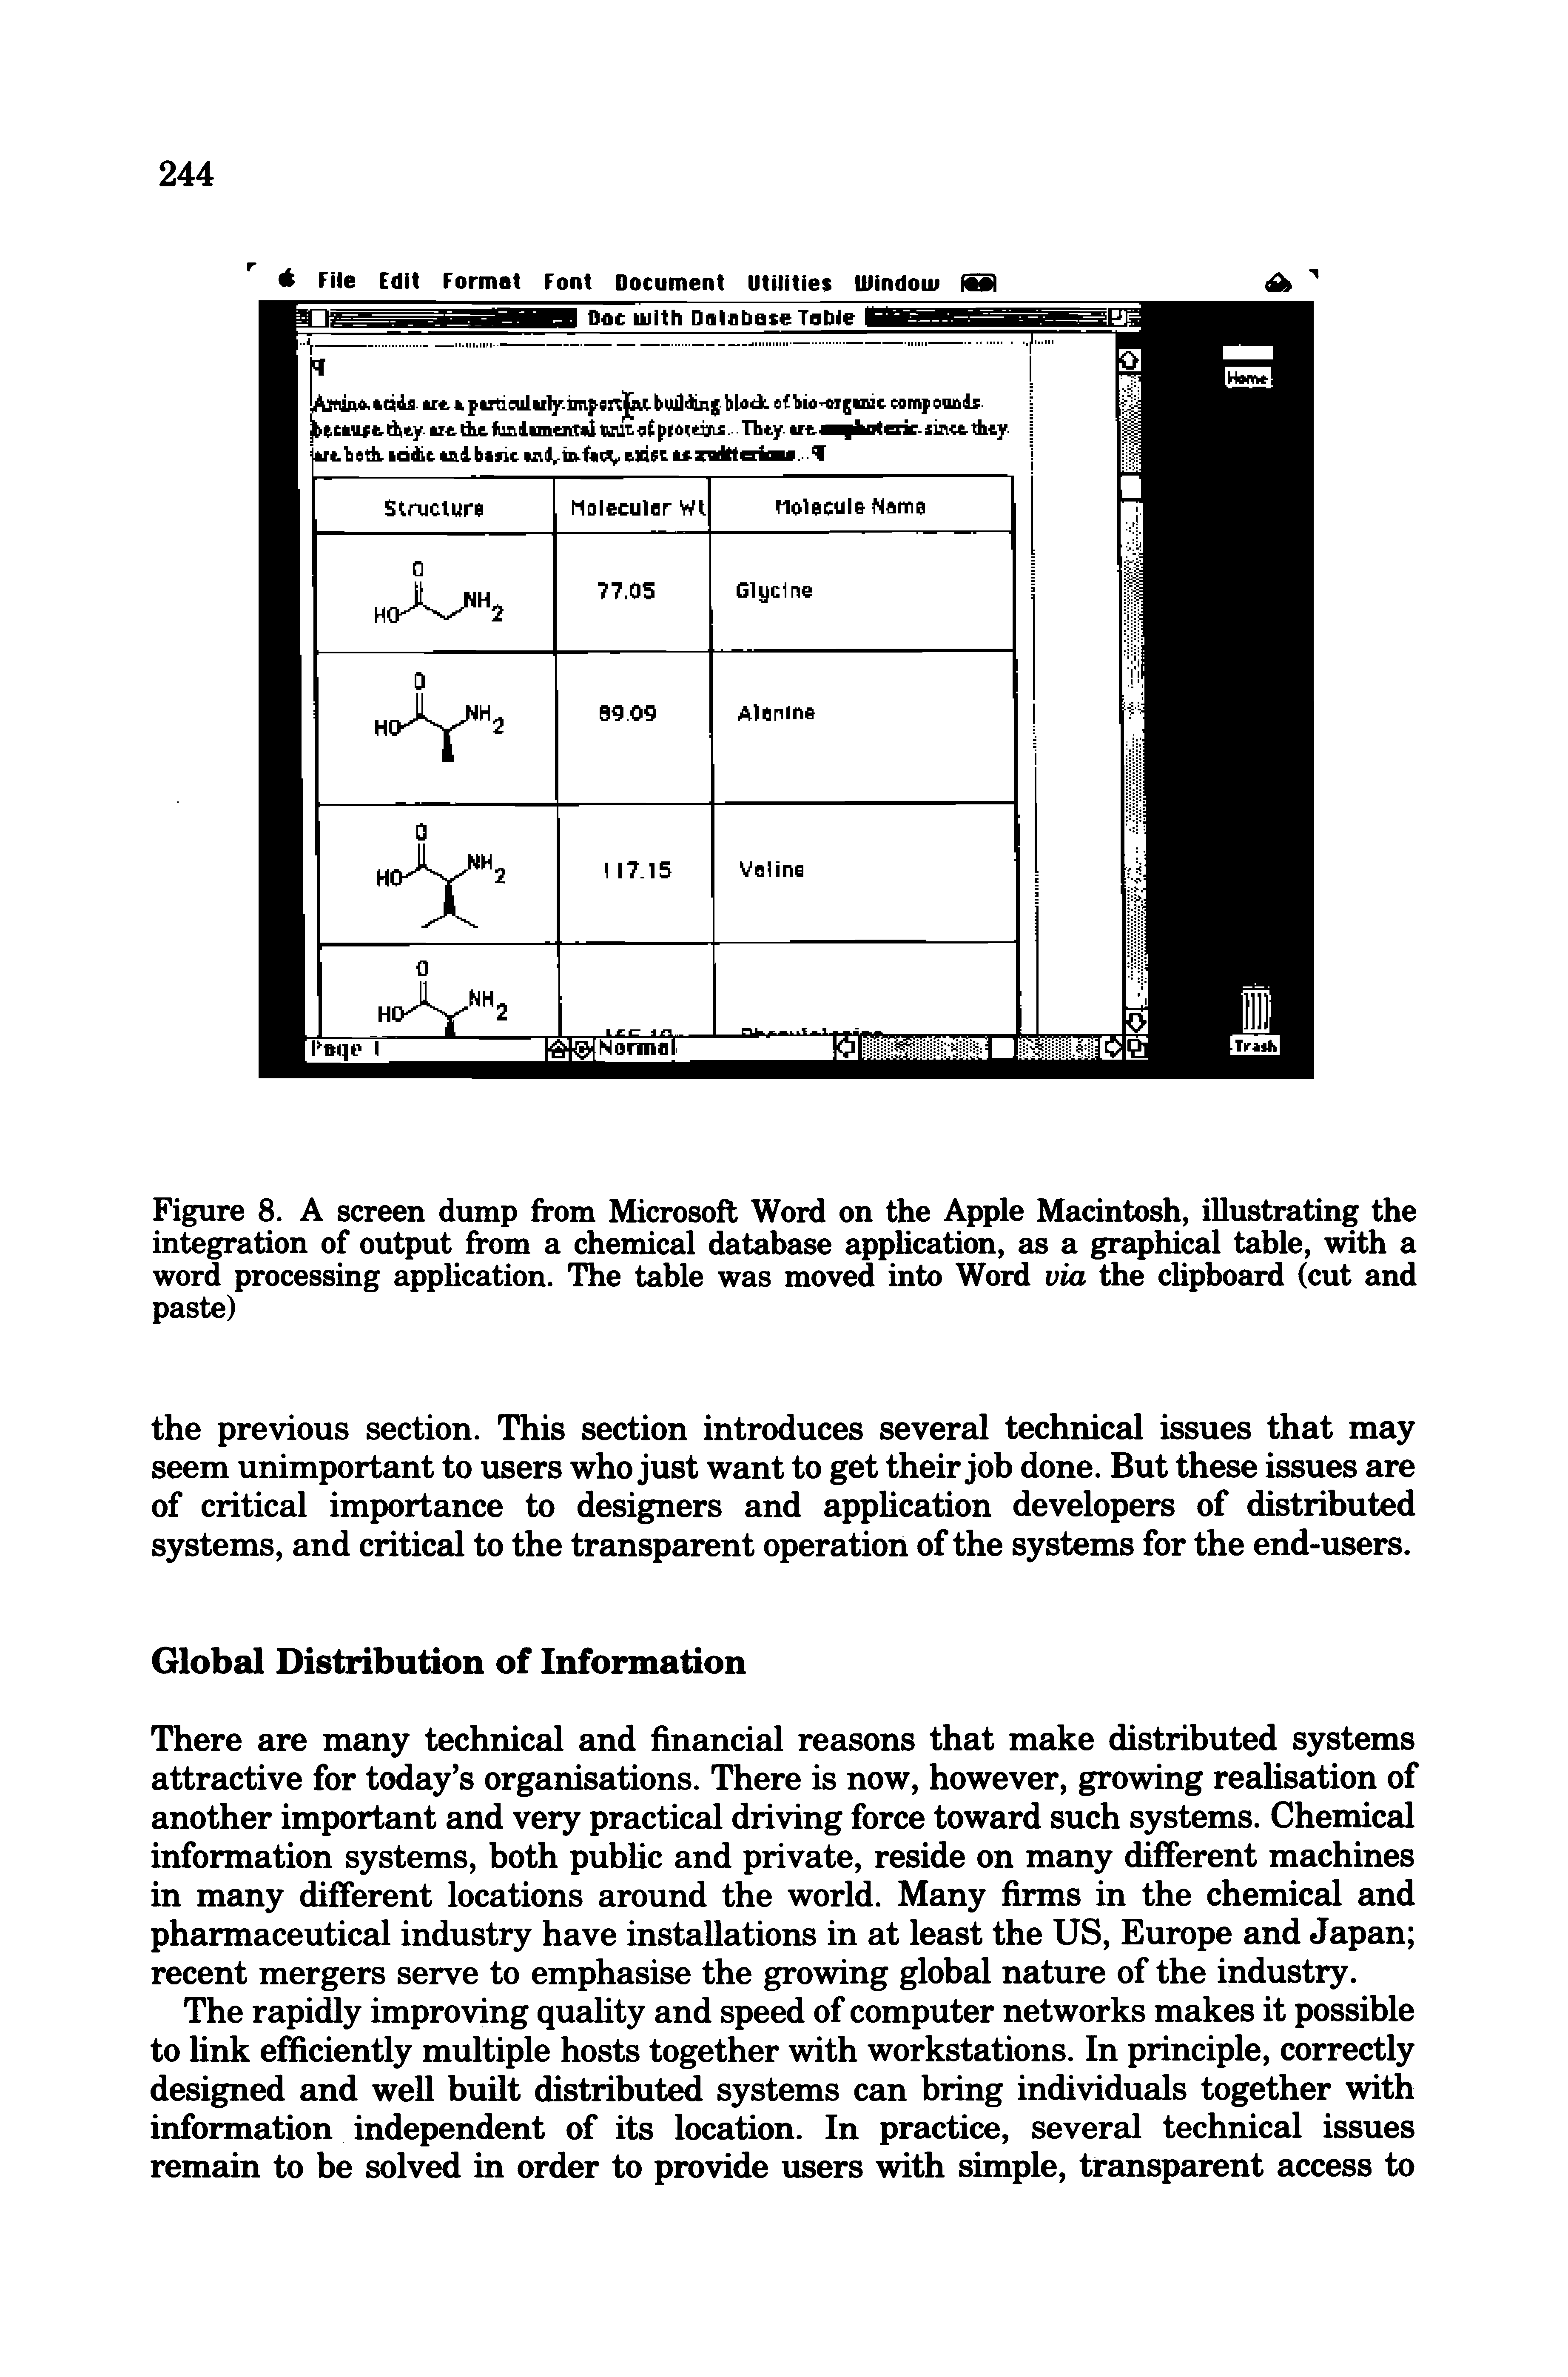 Figure 8. A screen dump from Microsoft Word on the Apple Macintosh, illustrating the integration of output from a chemical database apphcation, as a graphical table, with a word processing application. The table was moved into Word via the cHpboard (cut and paste)...